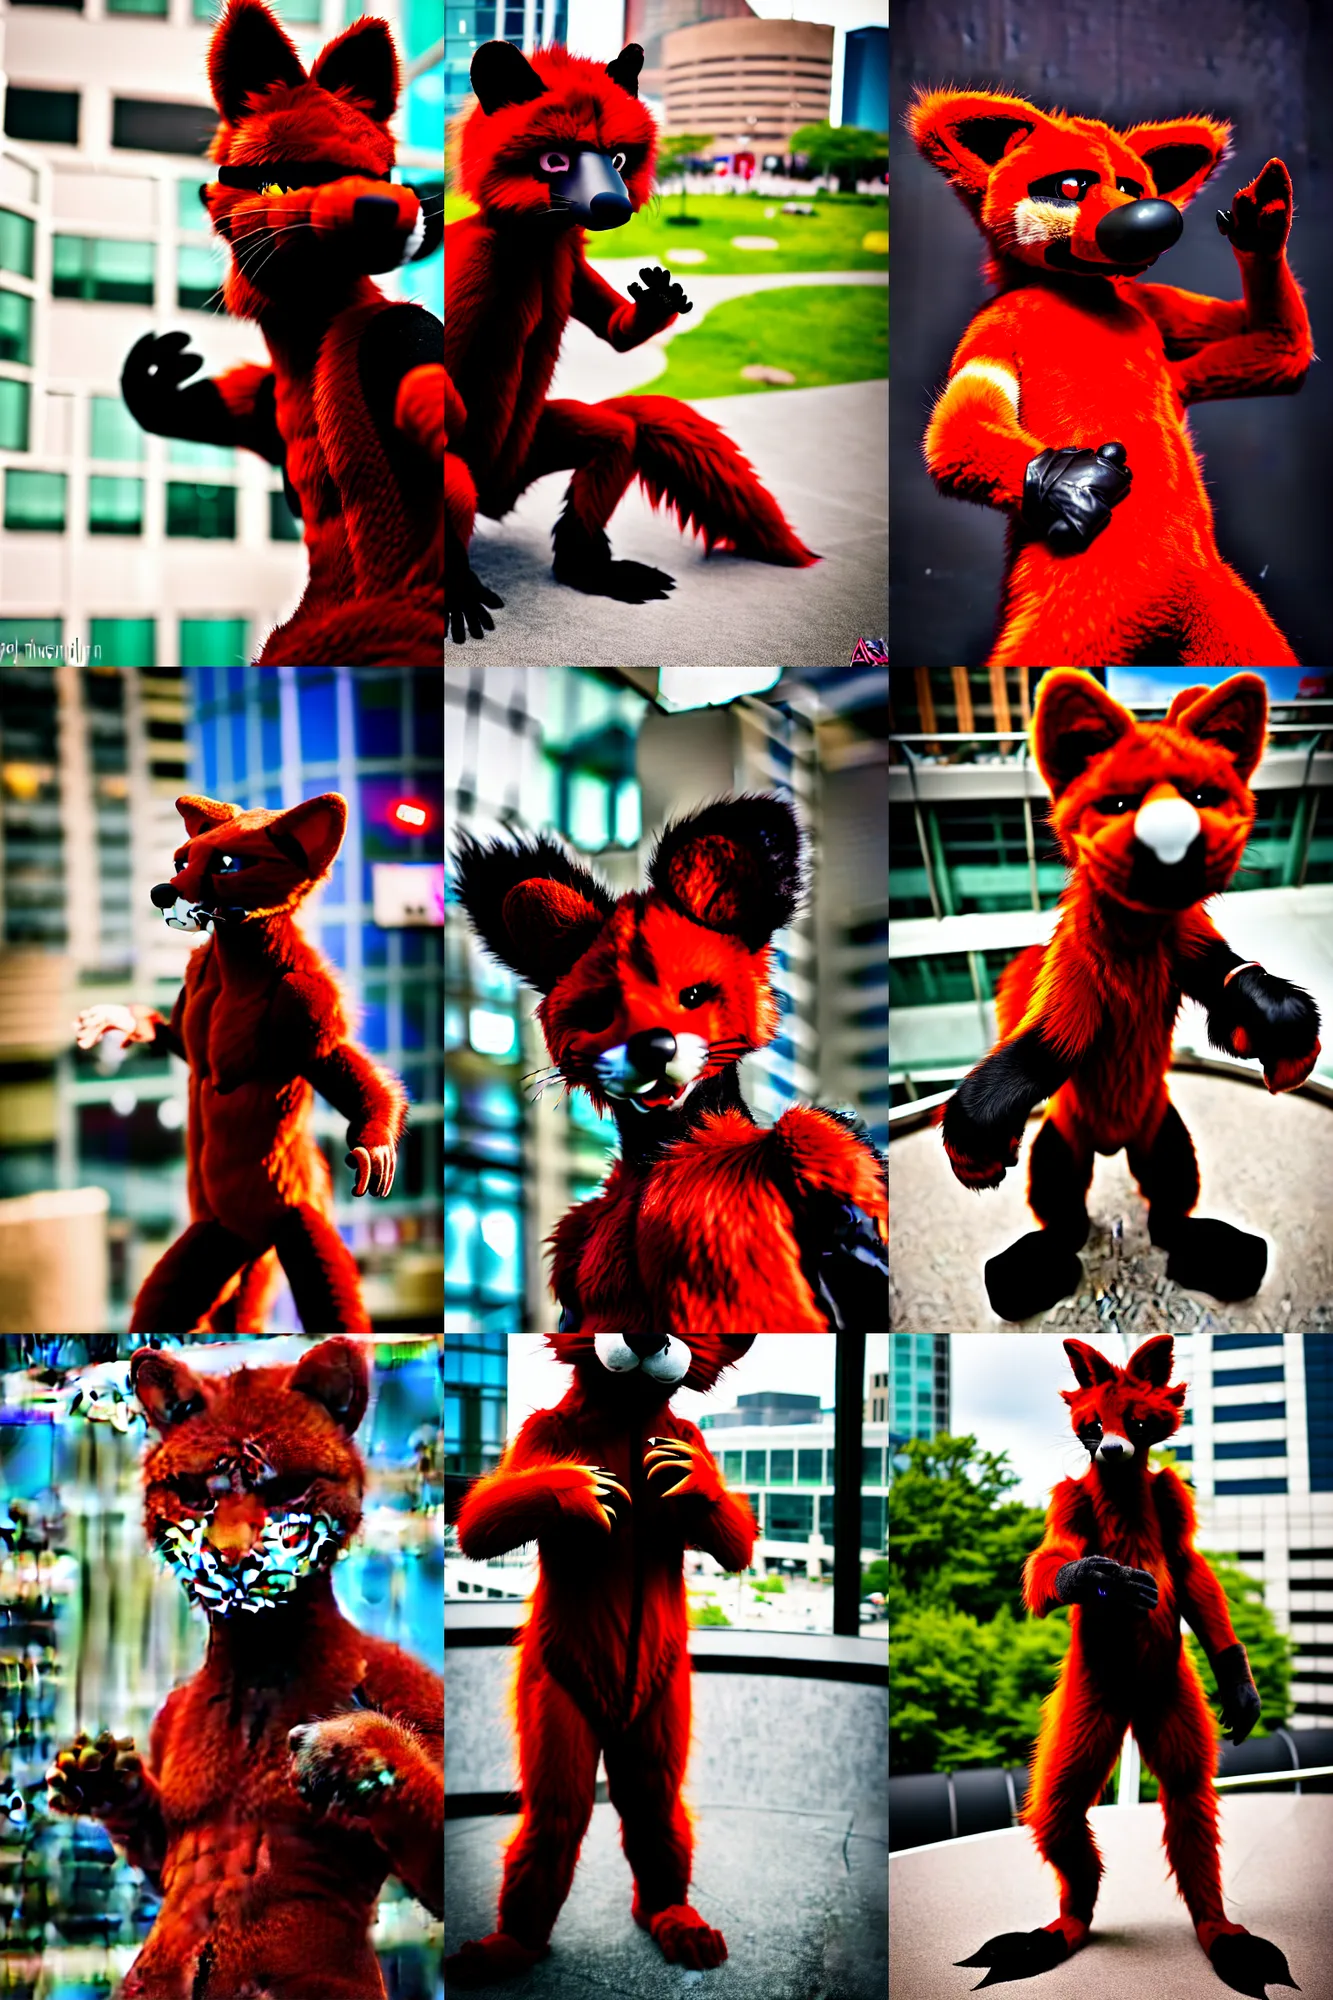 Prompt: photo of a fursuiter posing | | fullbody photoshoot photo portrait of a cute roguish male red - black furred weasel furry fursuiter ( tail attached ), key visual, taken at anthrocon ( furry convention )